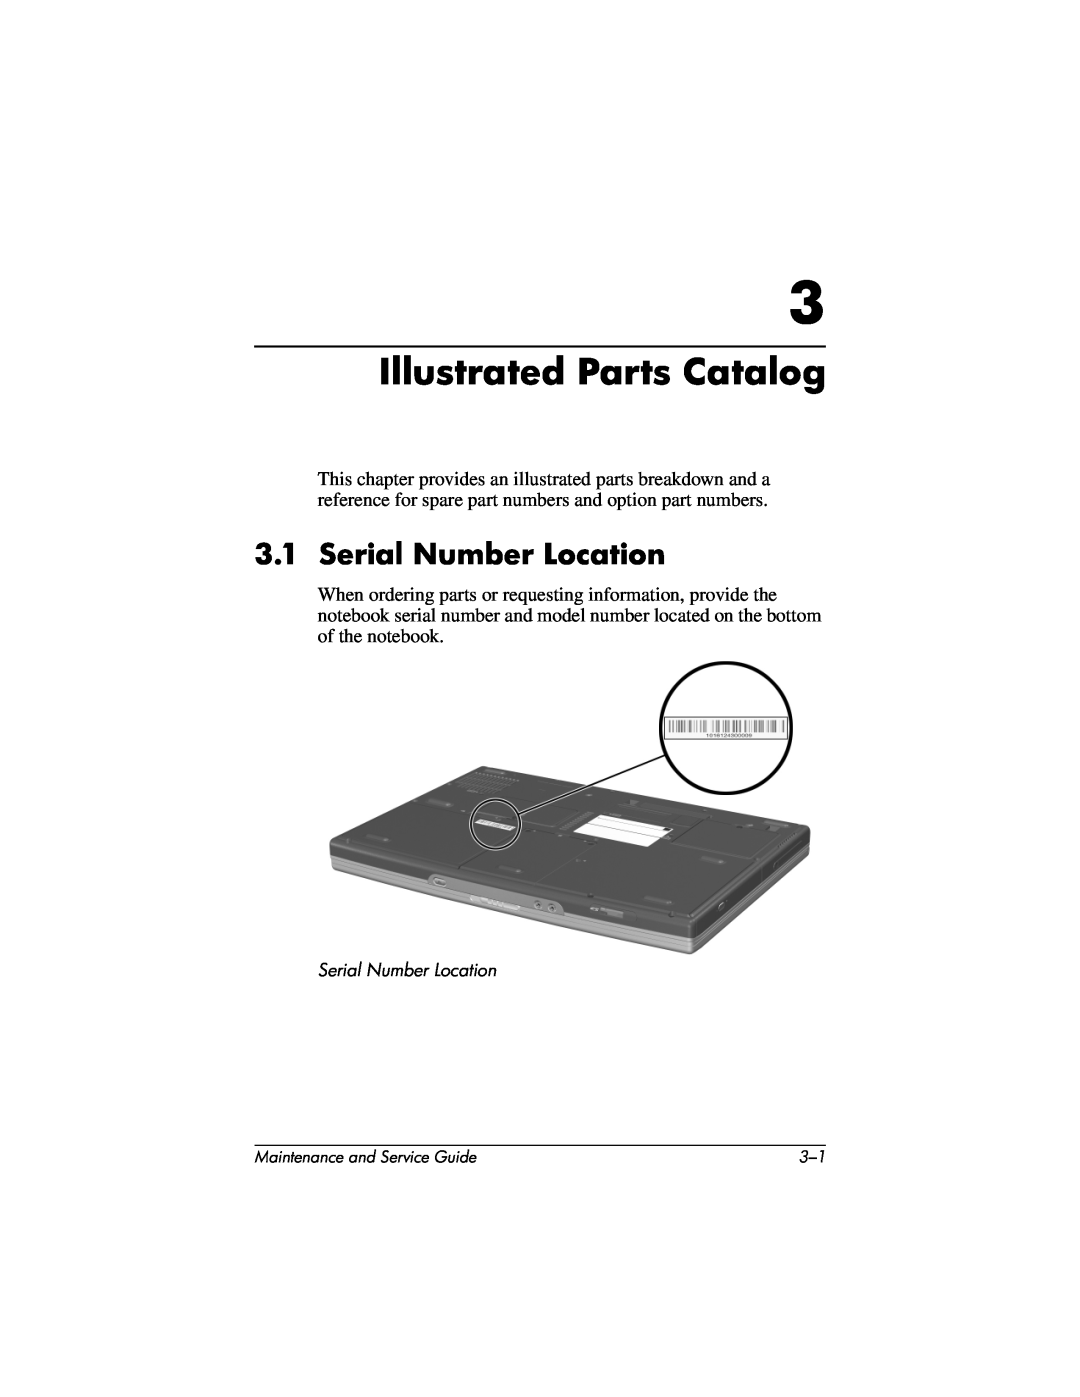 HP X1062AP, X1027AP, X1026AP, X1023AP, X1020EA, X1018CL, X1012EA, X1012QV manual Illustrated Parts Catalog, Serial Number Location 